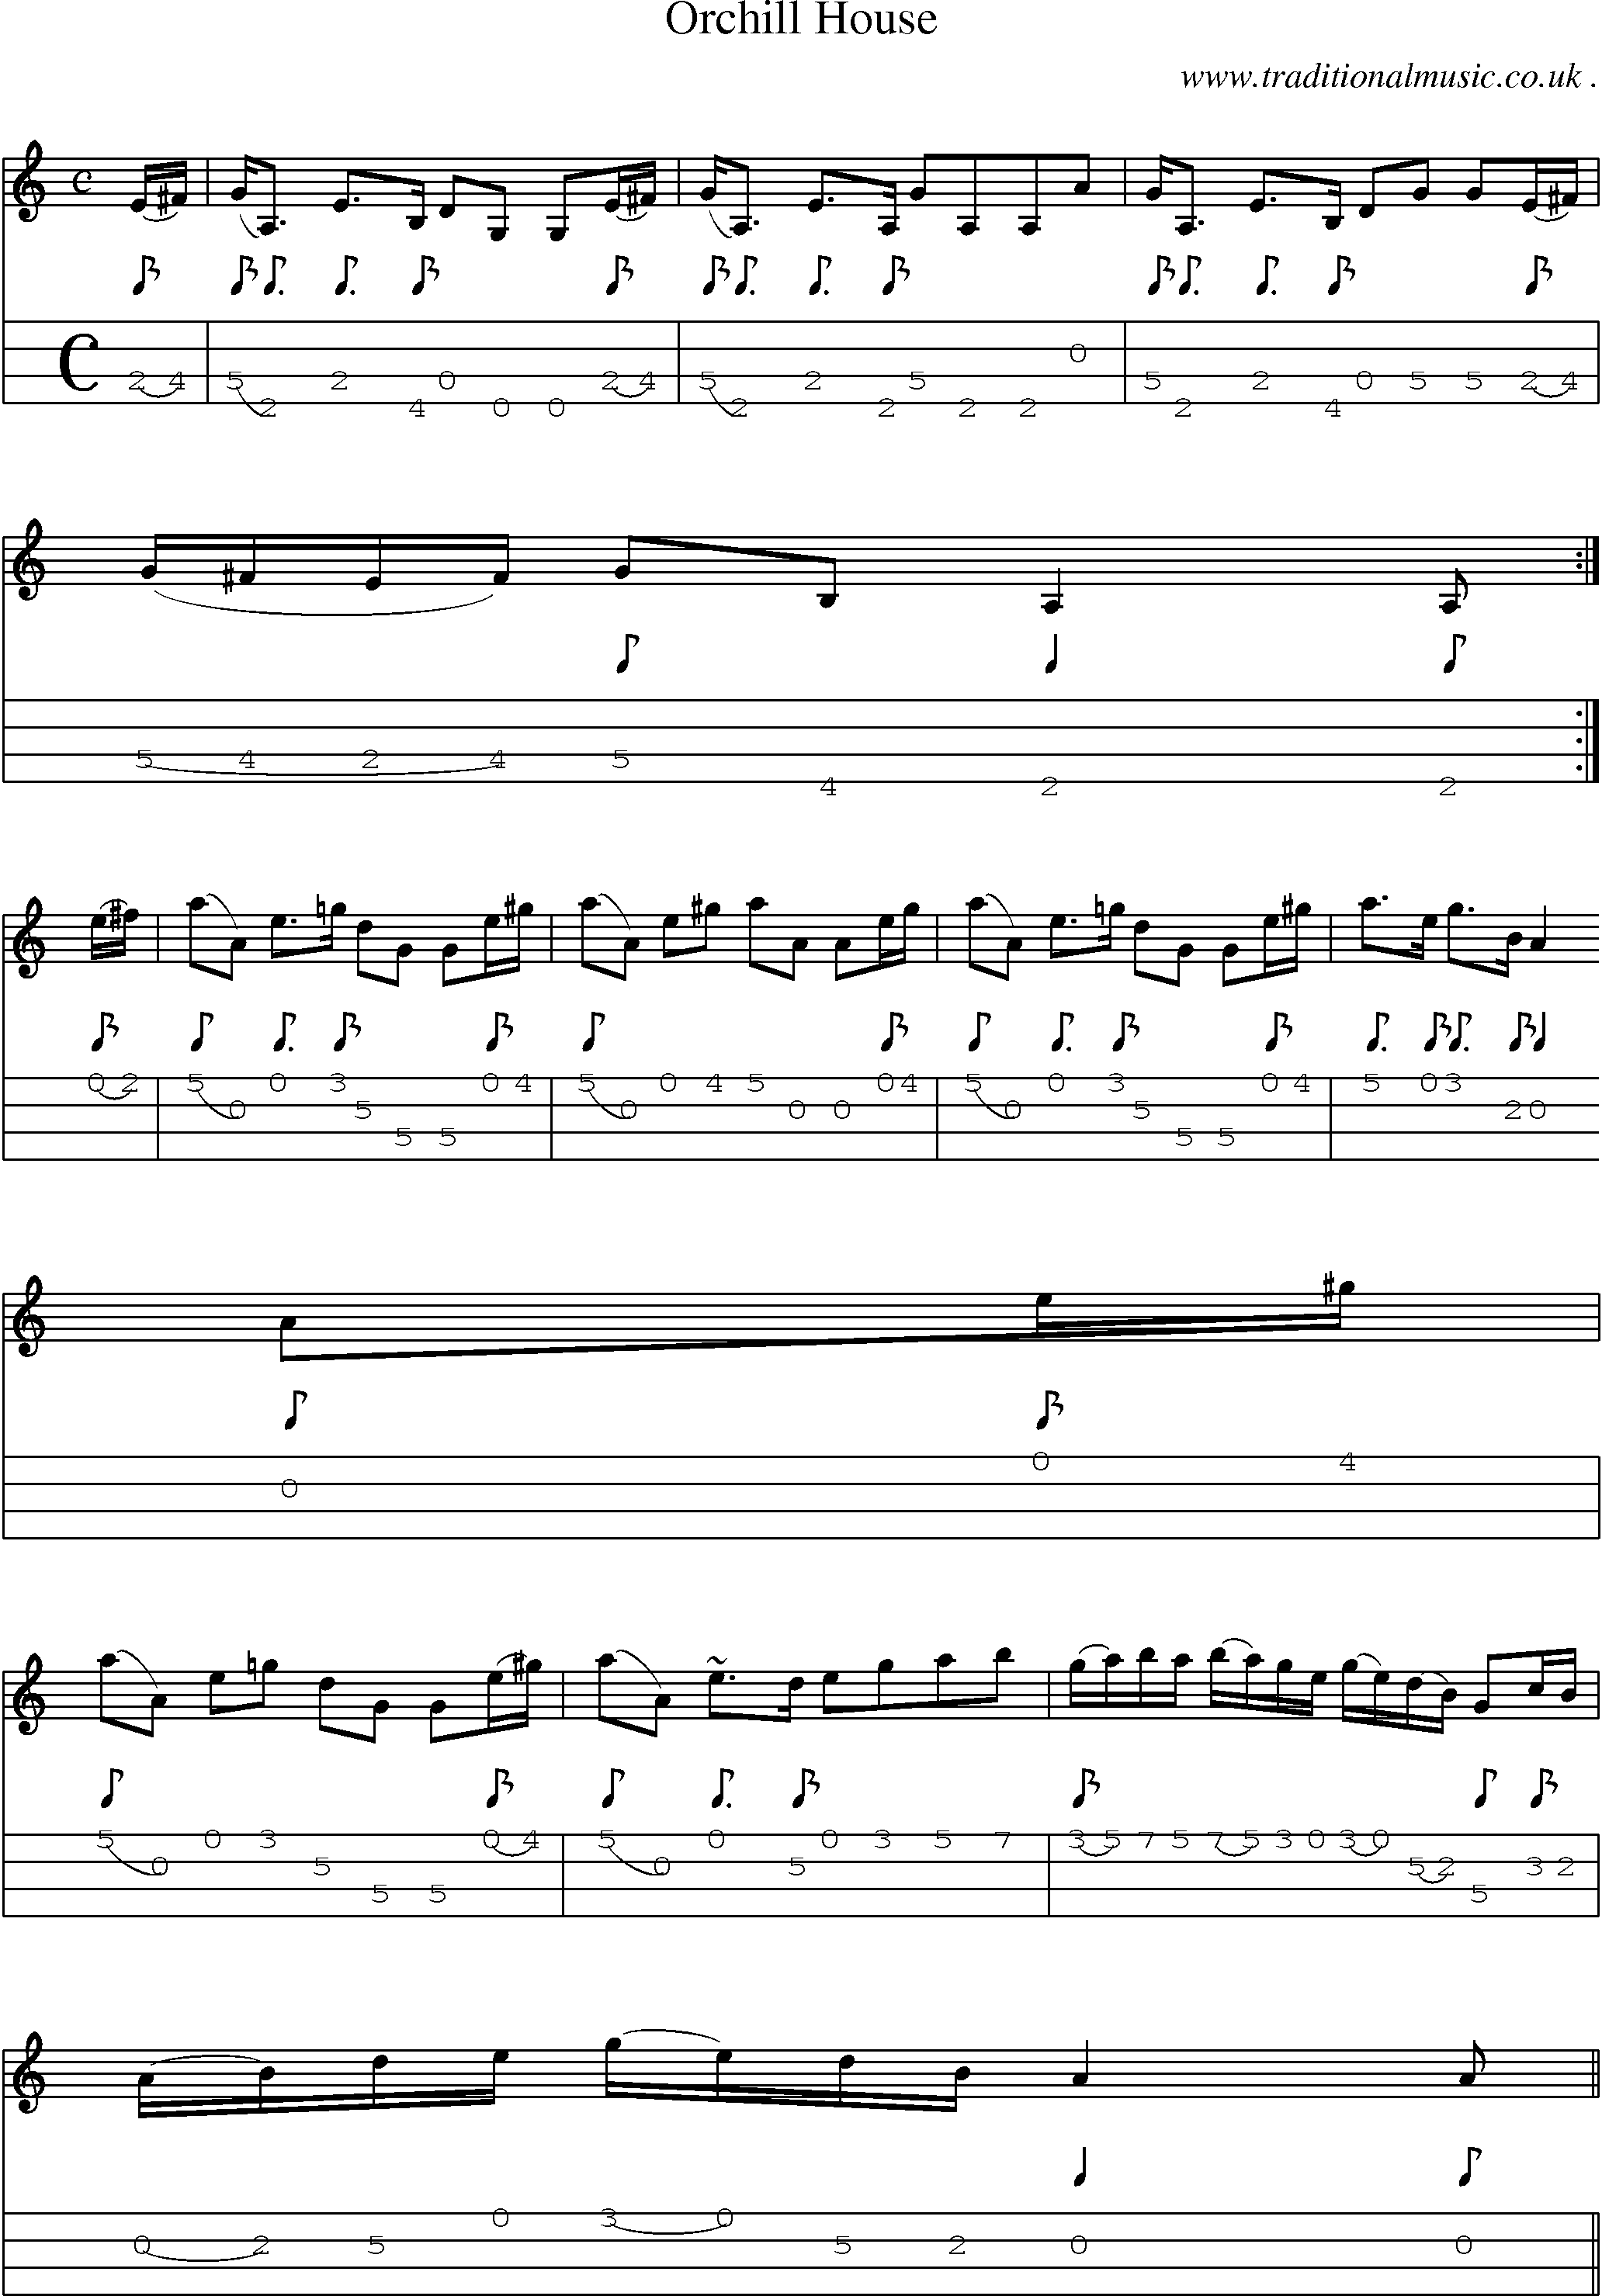 Sheet-music  score, Chords and Mandolin Tabs for Orchill House